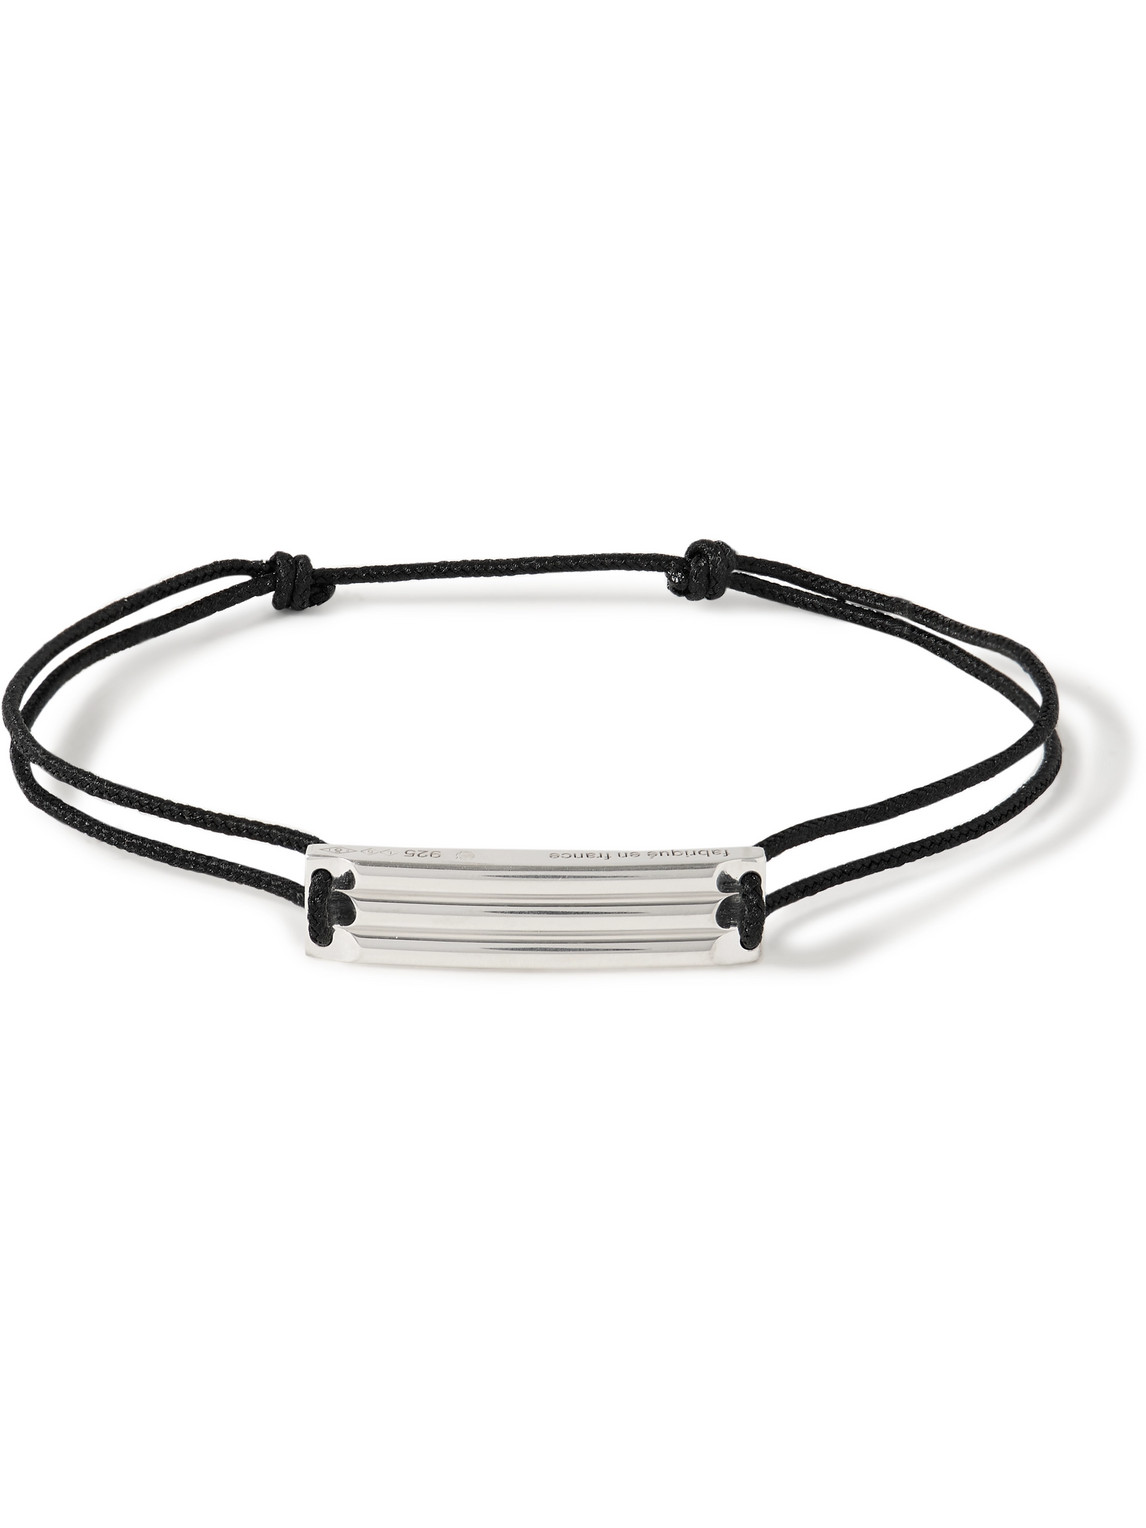 Shop Le Gramme Godron 5g Waxed-cord And Recycled Sterling Silver Bracelet